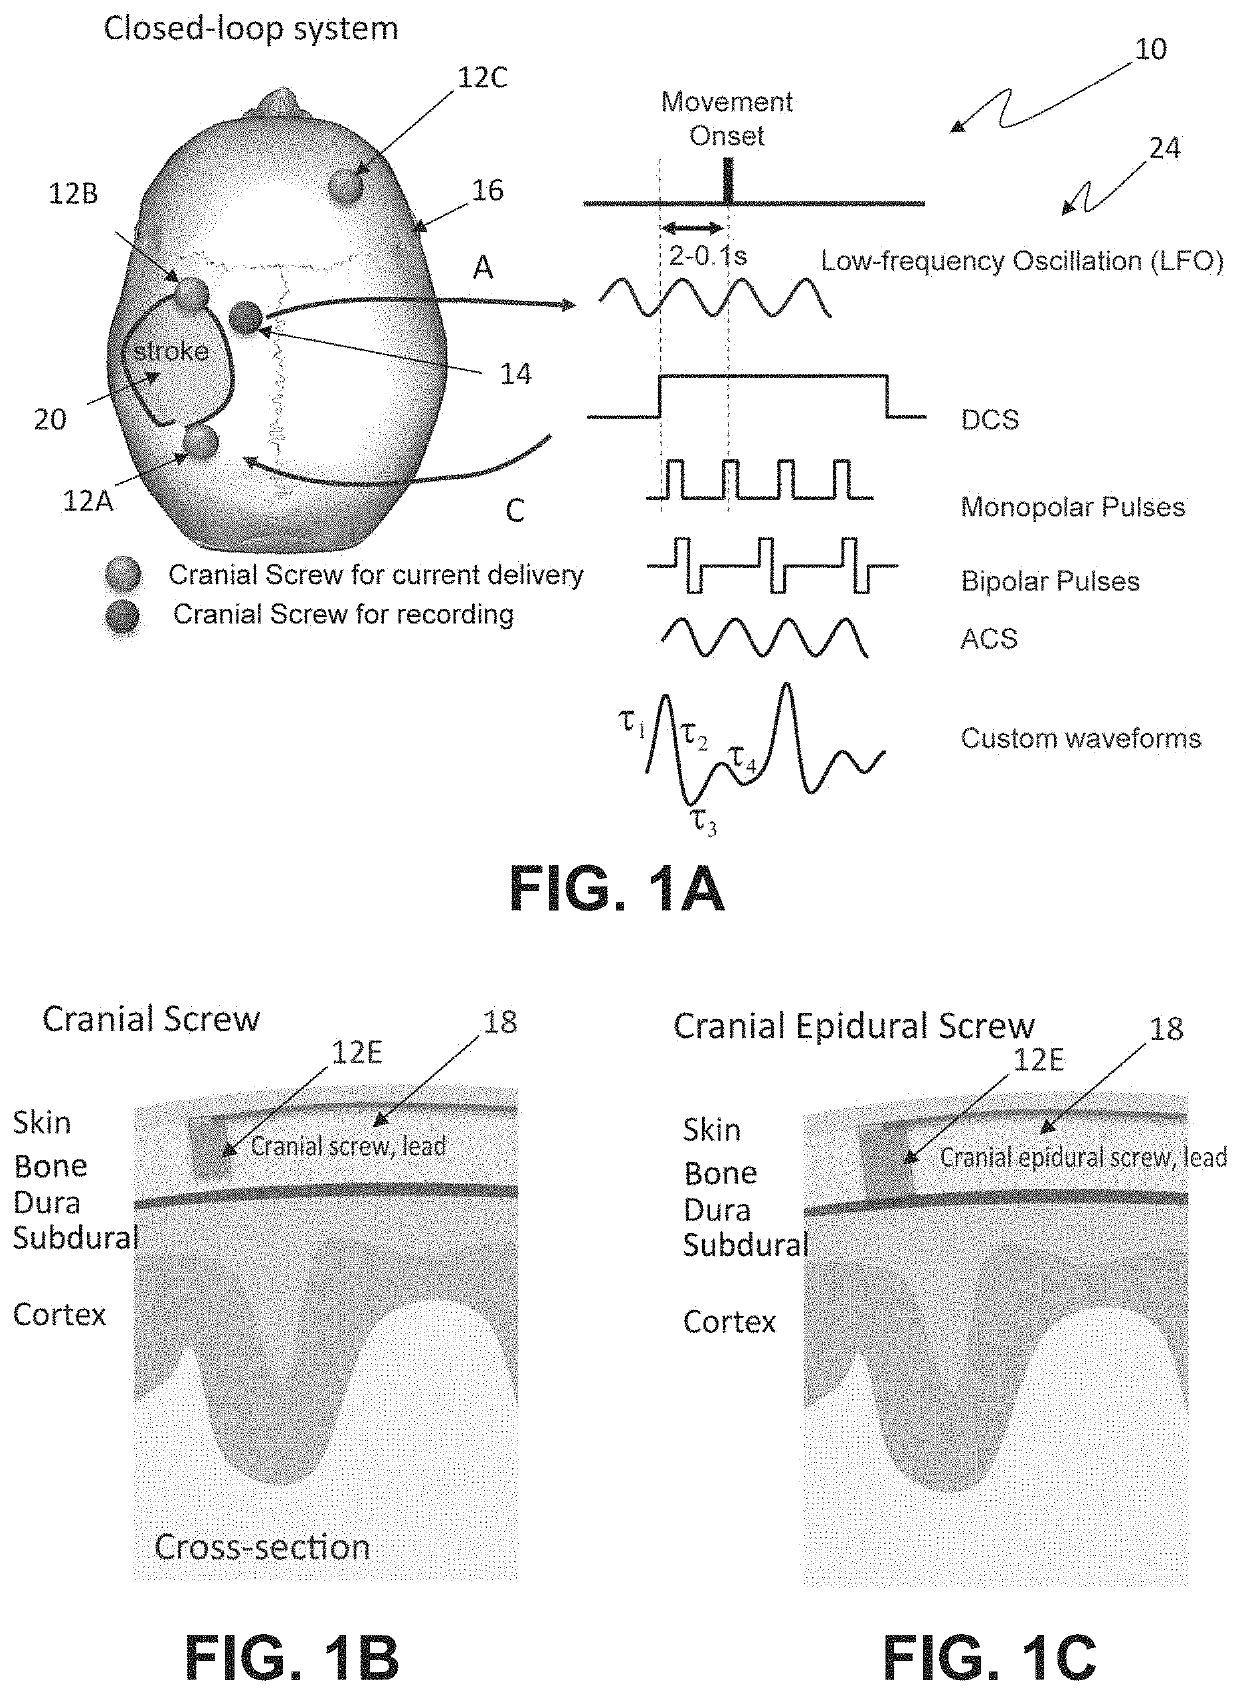 Systems Methods And Devices For Closed-Loop Stimulation To Enhance Stroke Recovery